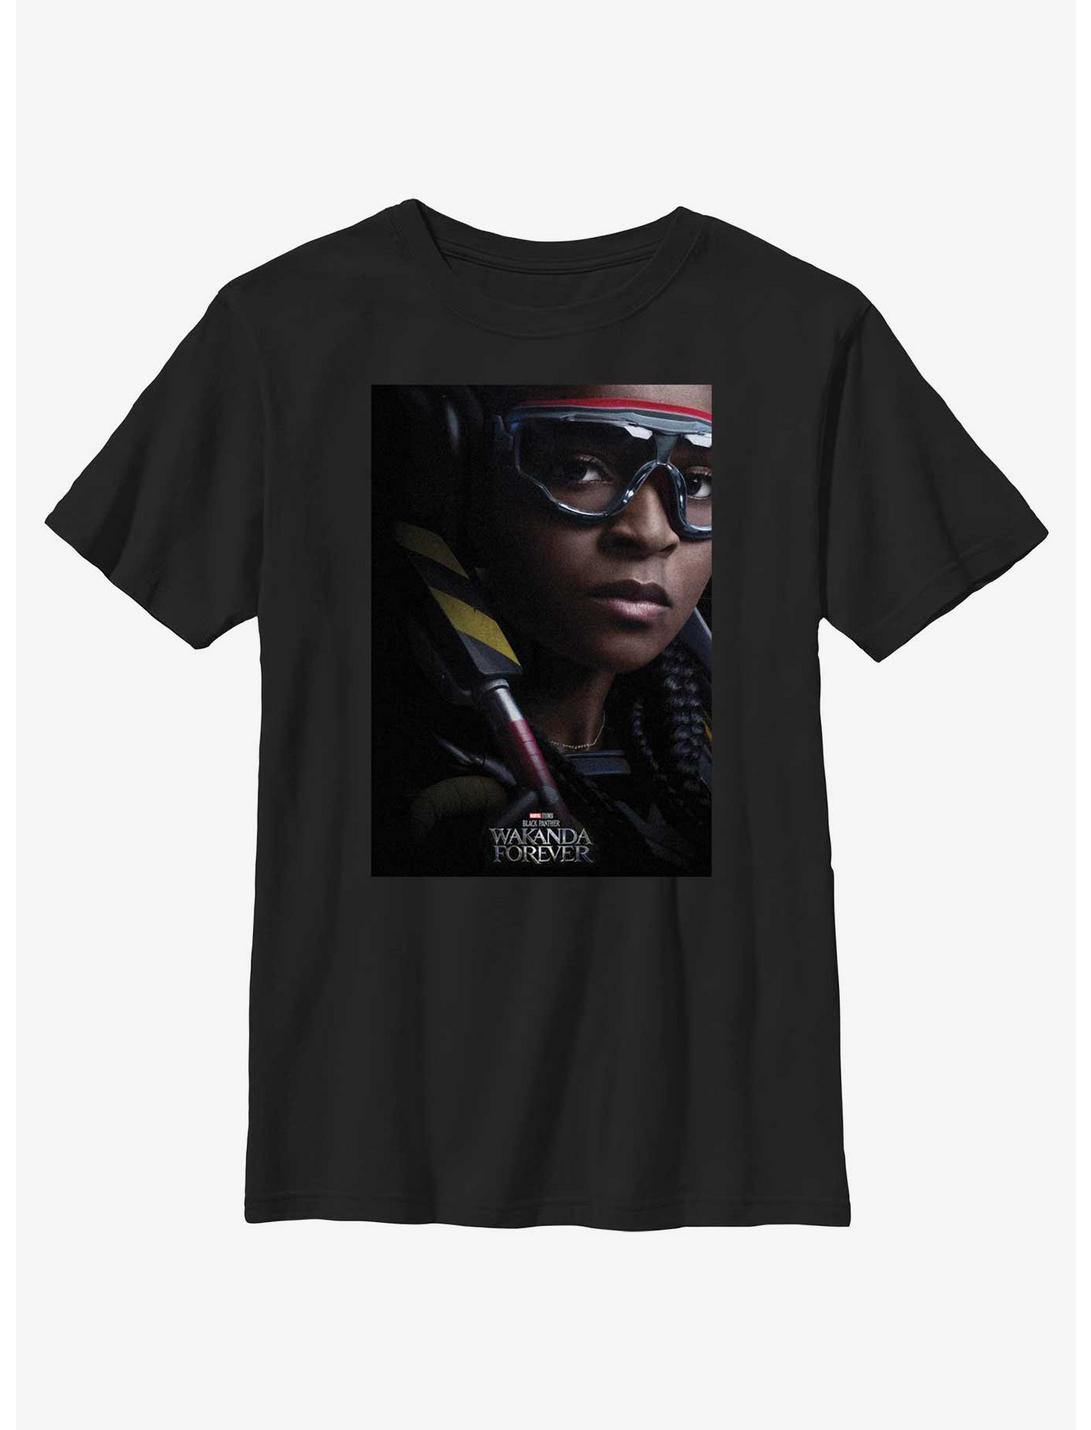 Marvel Black Panther: Wakanda Forever Iron Heart Movie Poster Youth T-Shirt, BLACK, hi-res